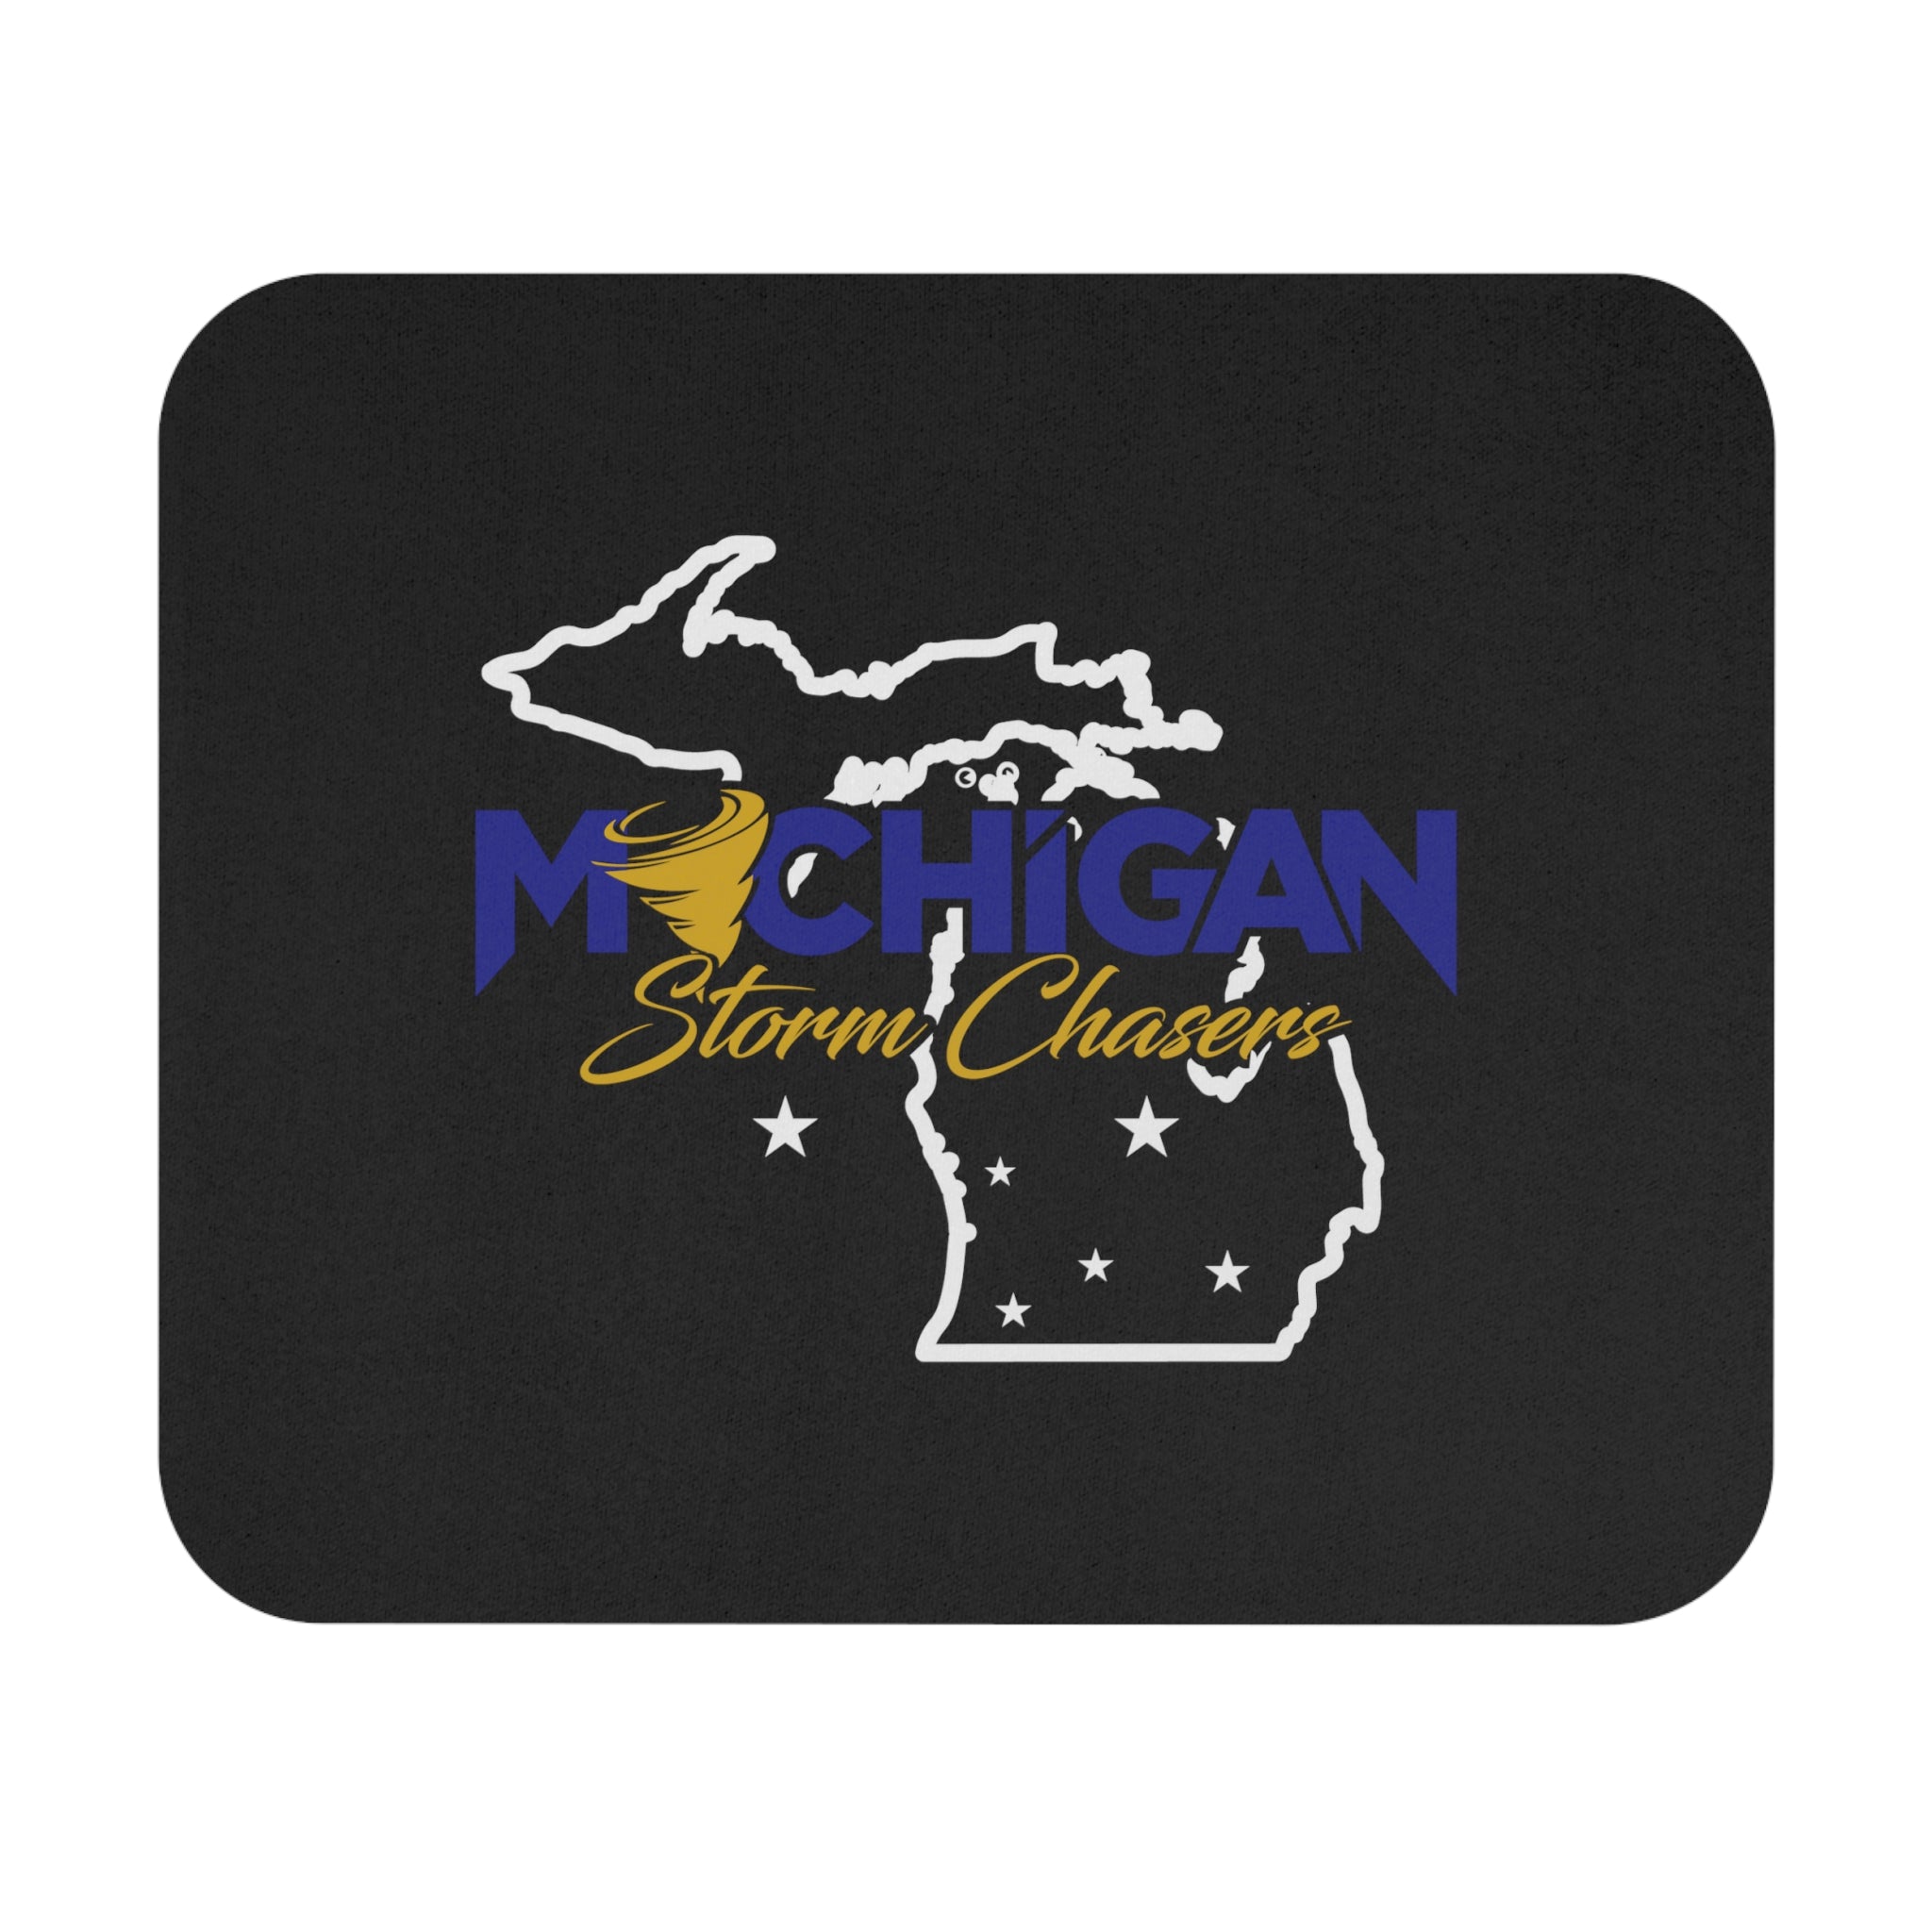 Michigan Storm Chasers Mouse Pad 